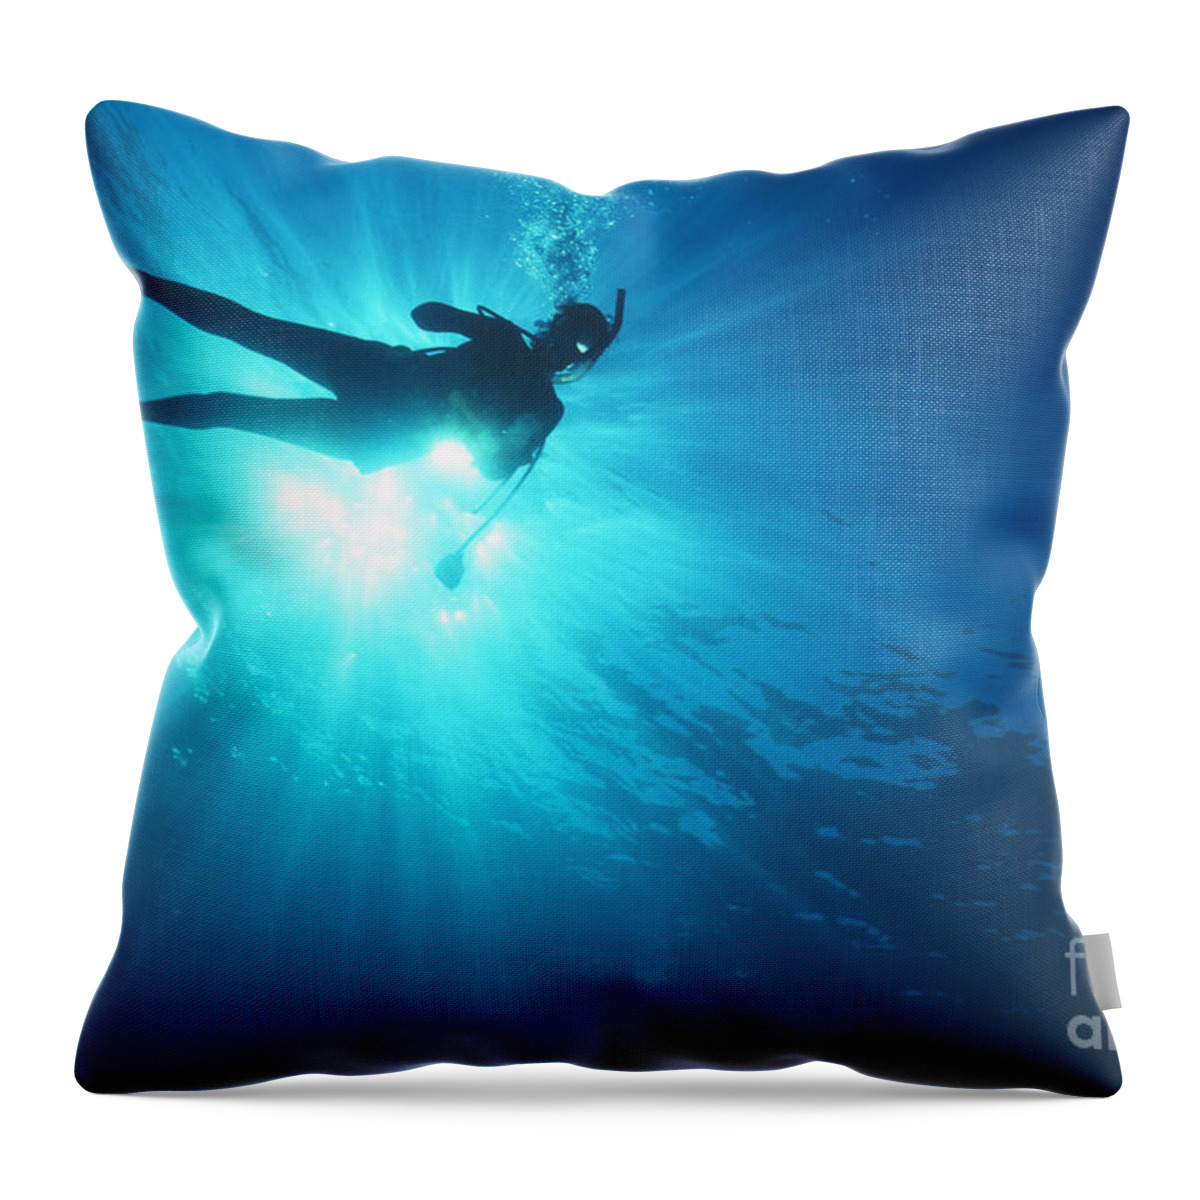 Blue Throw Pillow featuring the photograph Diver On Mahi Wreck by Bob Abraham - Printscapes